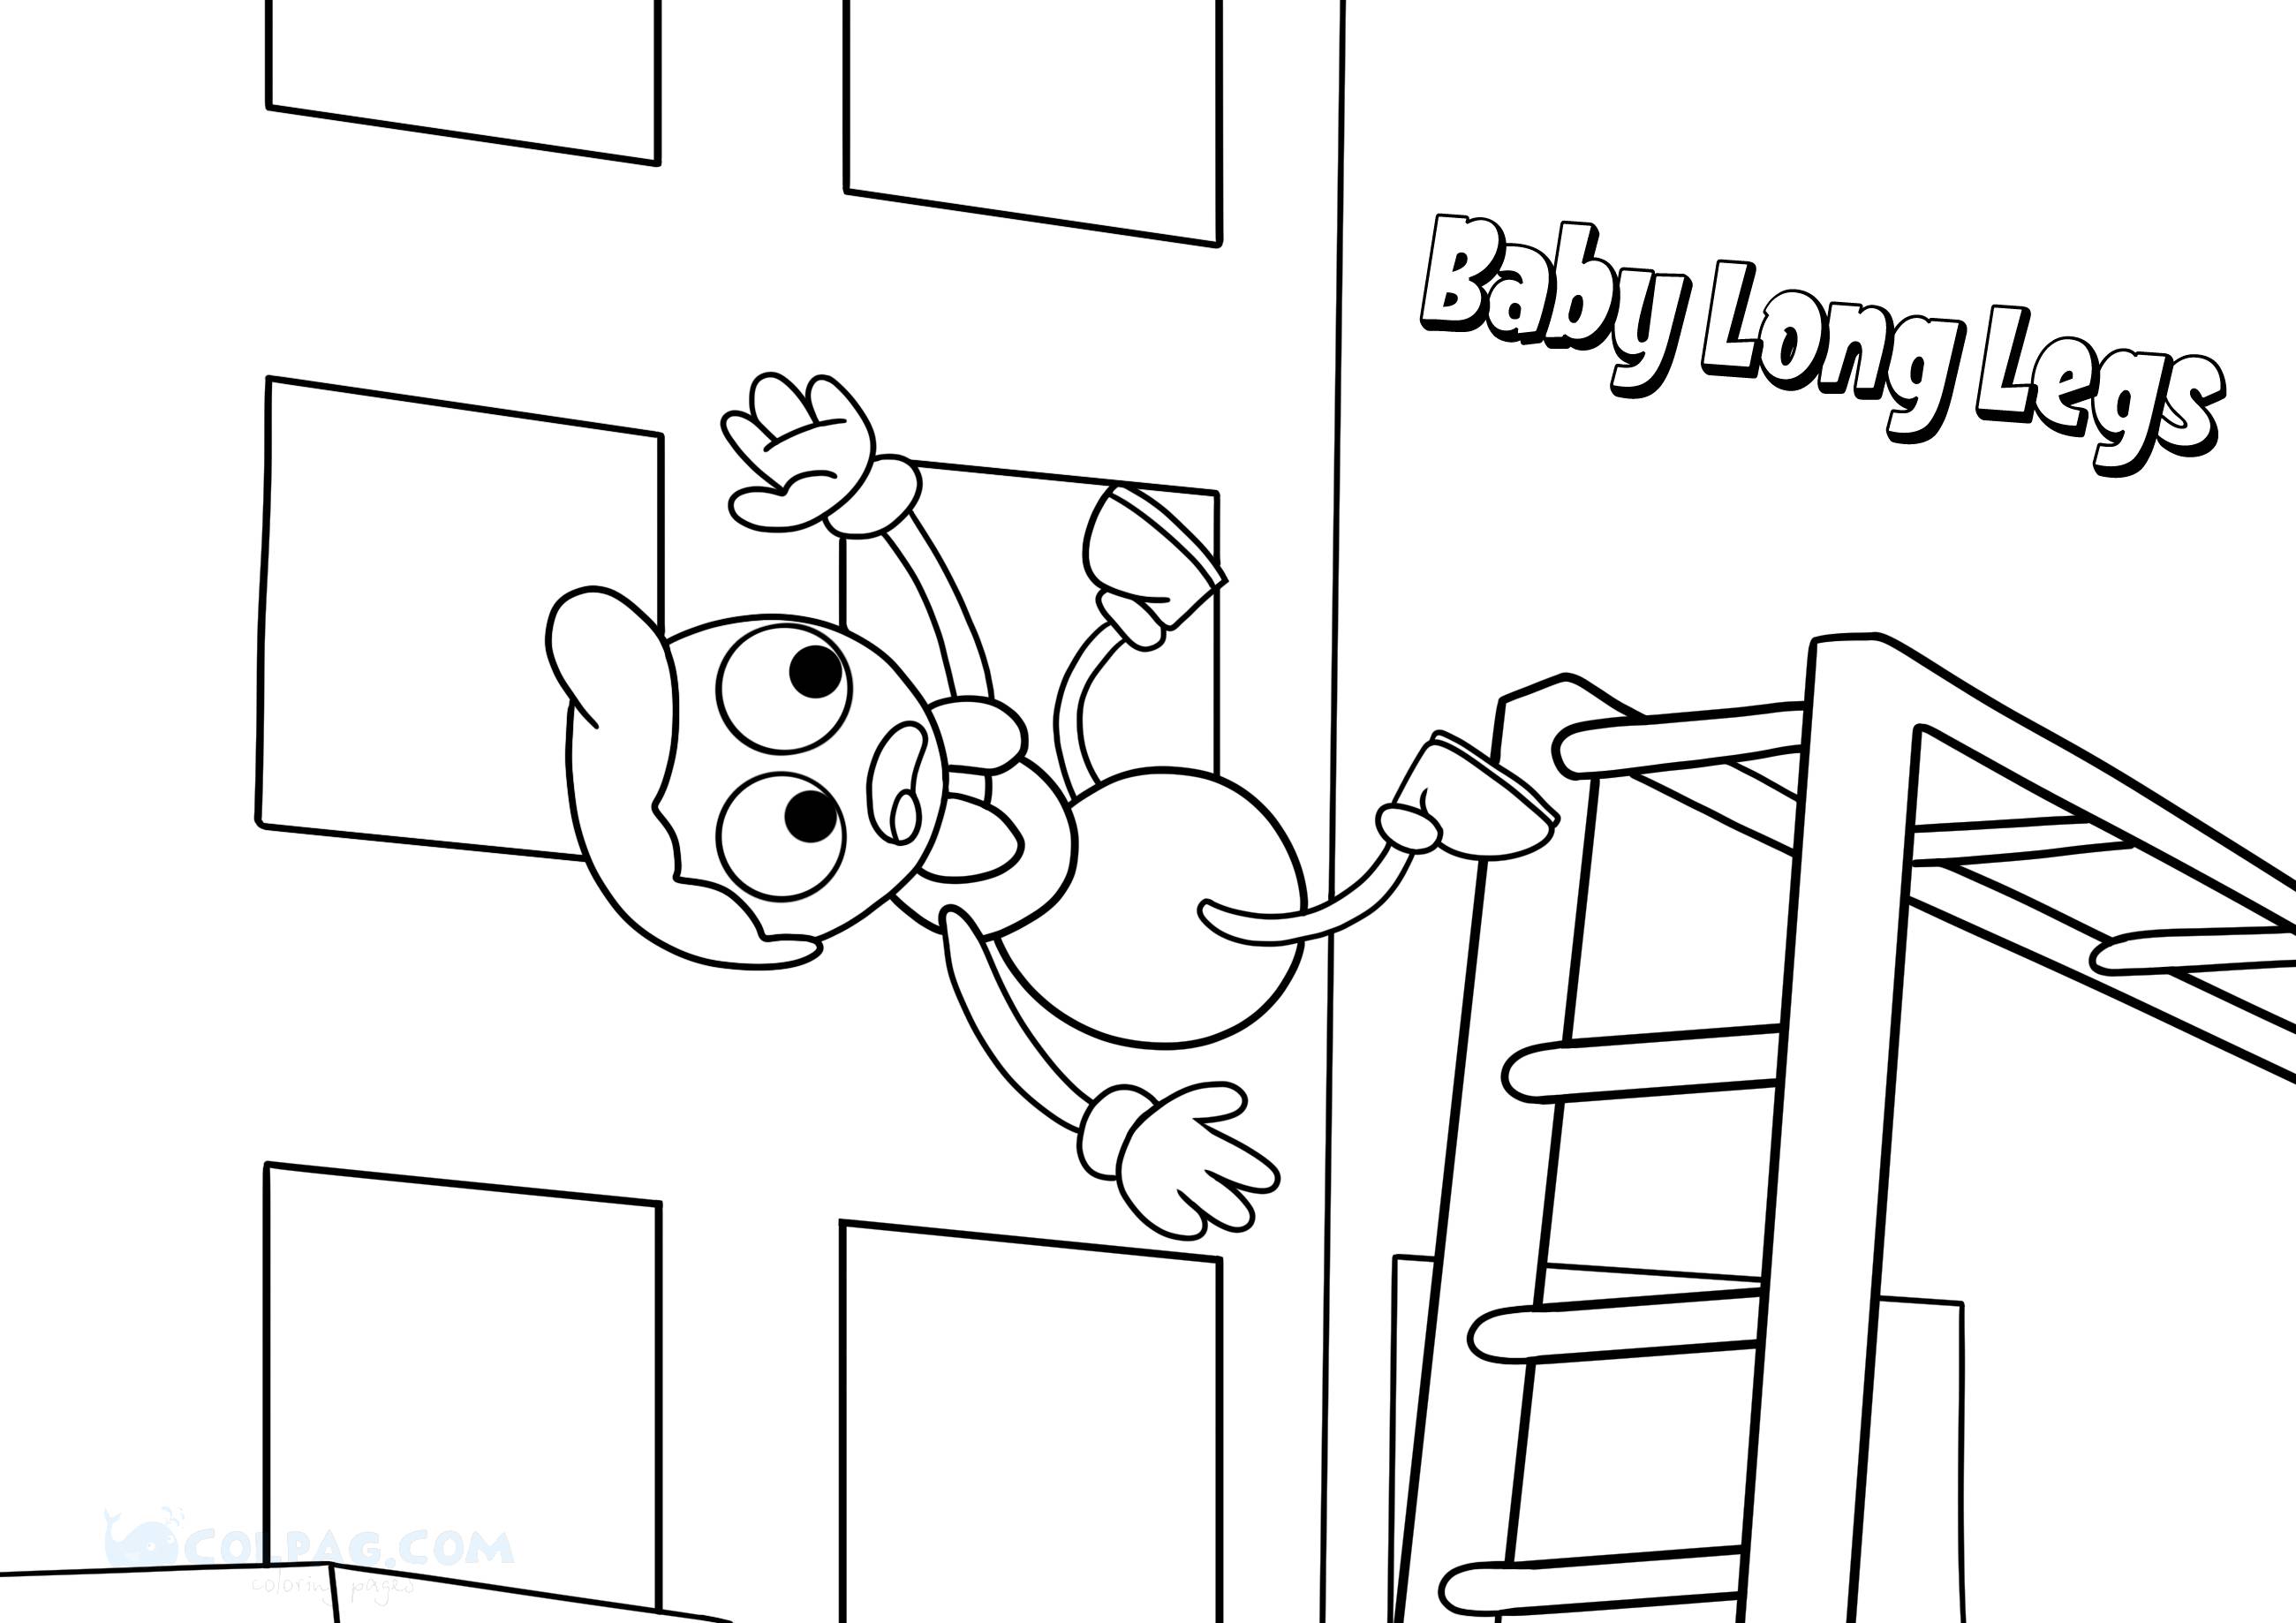 baby-long-legs-coloring-page-colpag-com-6